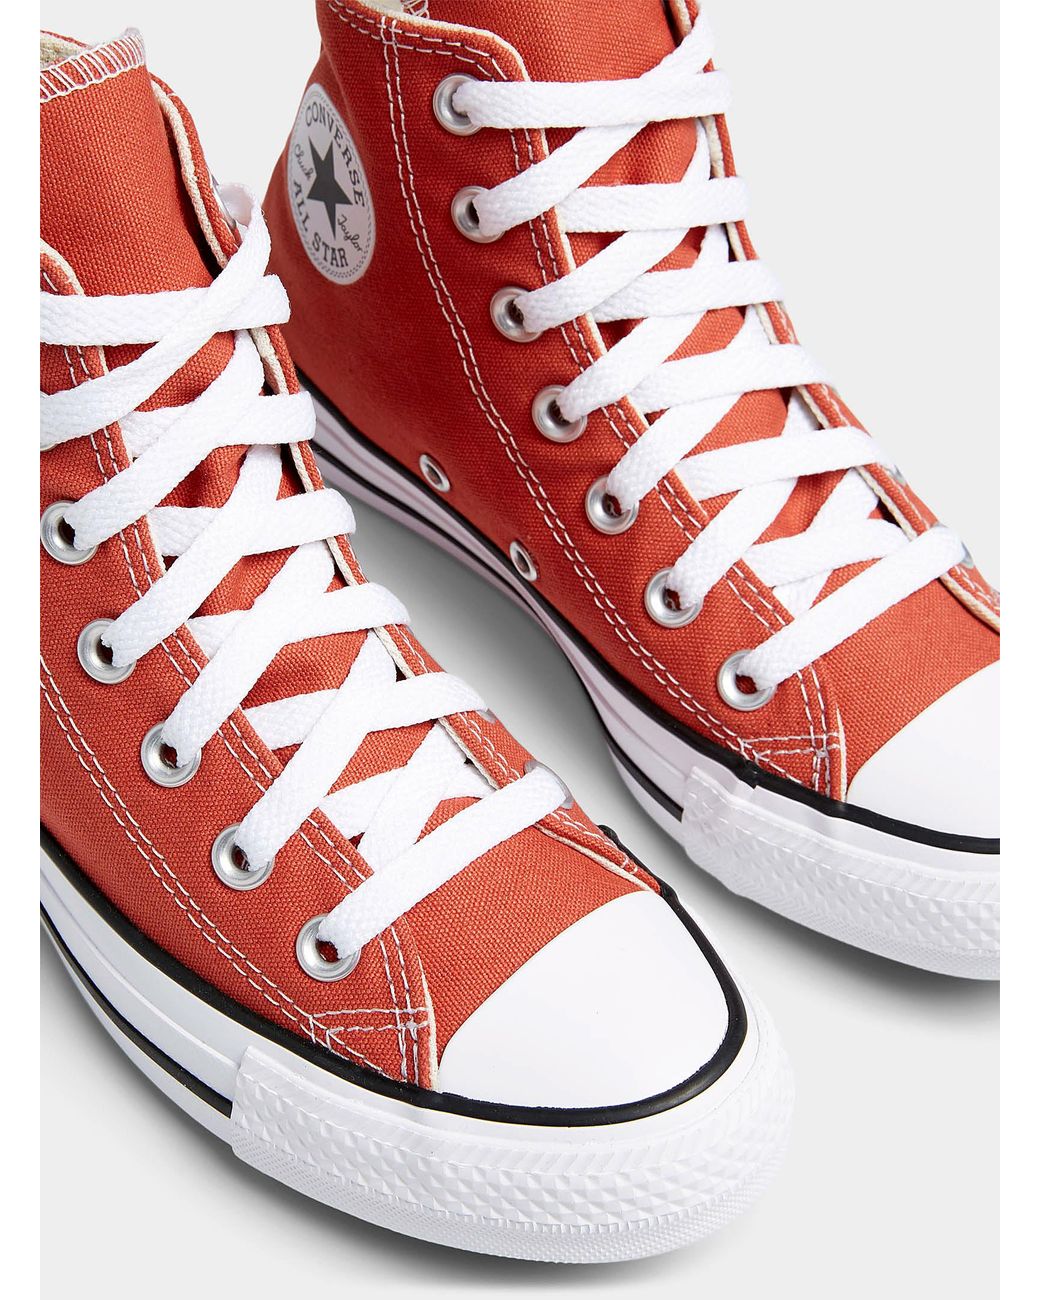 Converse Chuck Taylor All Star High Top Fire Opal Sneakers Women in Red |  Lyst